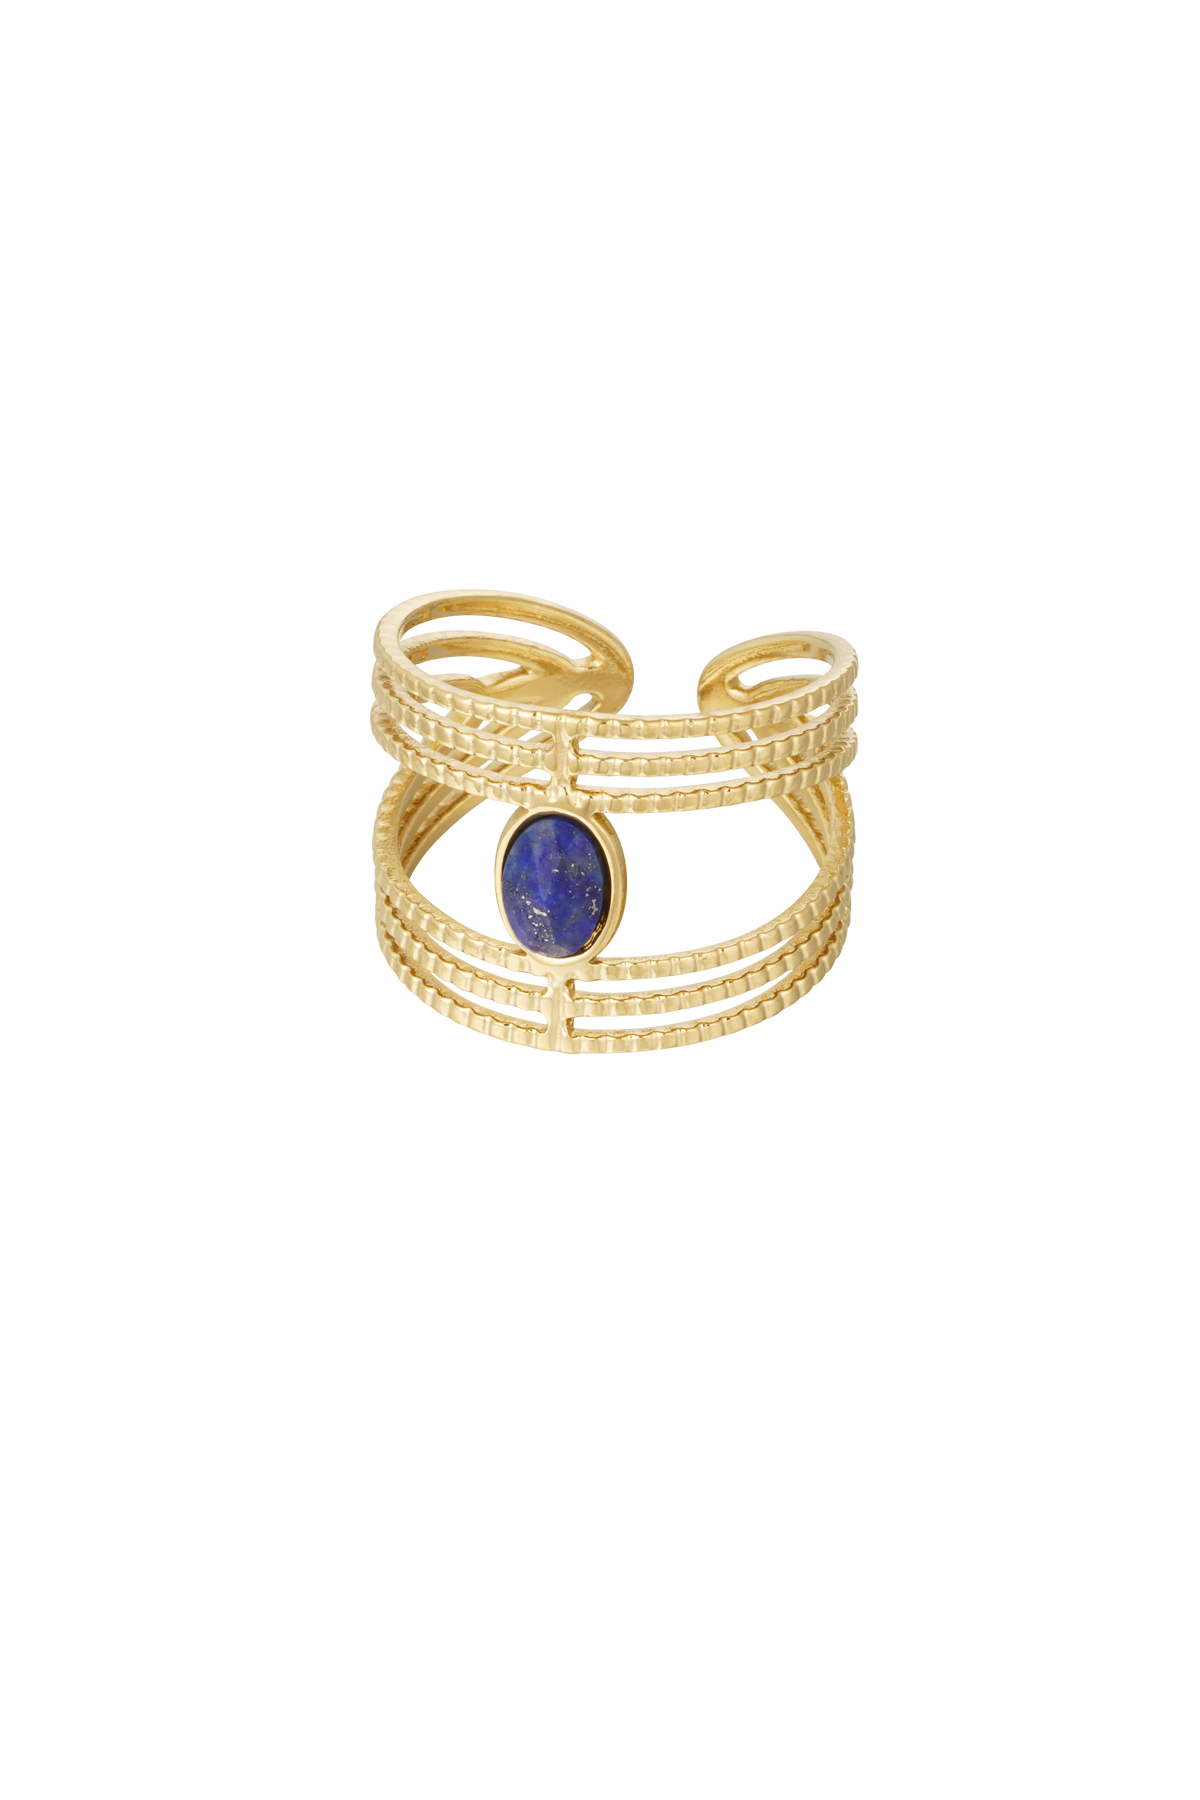 Statement graceful ring with stone - gold/blue